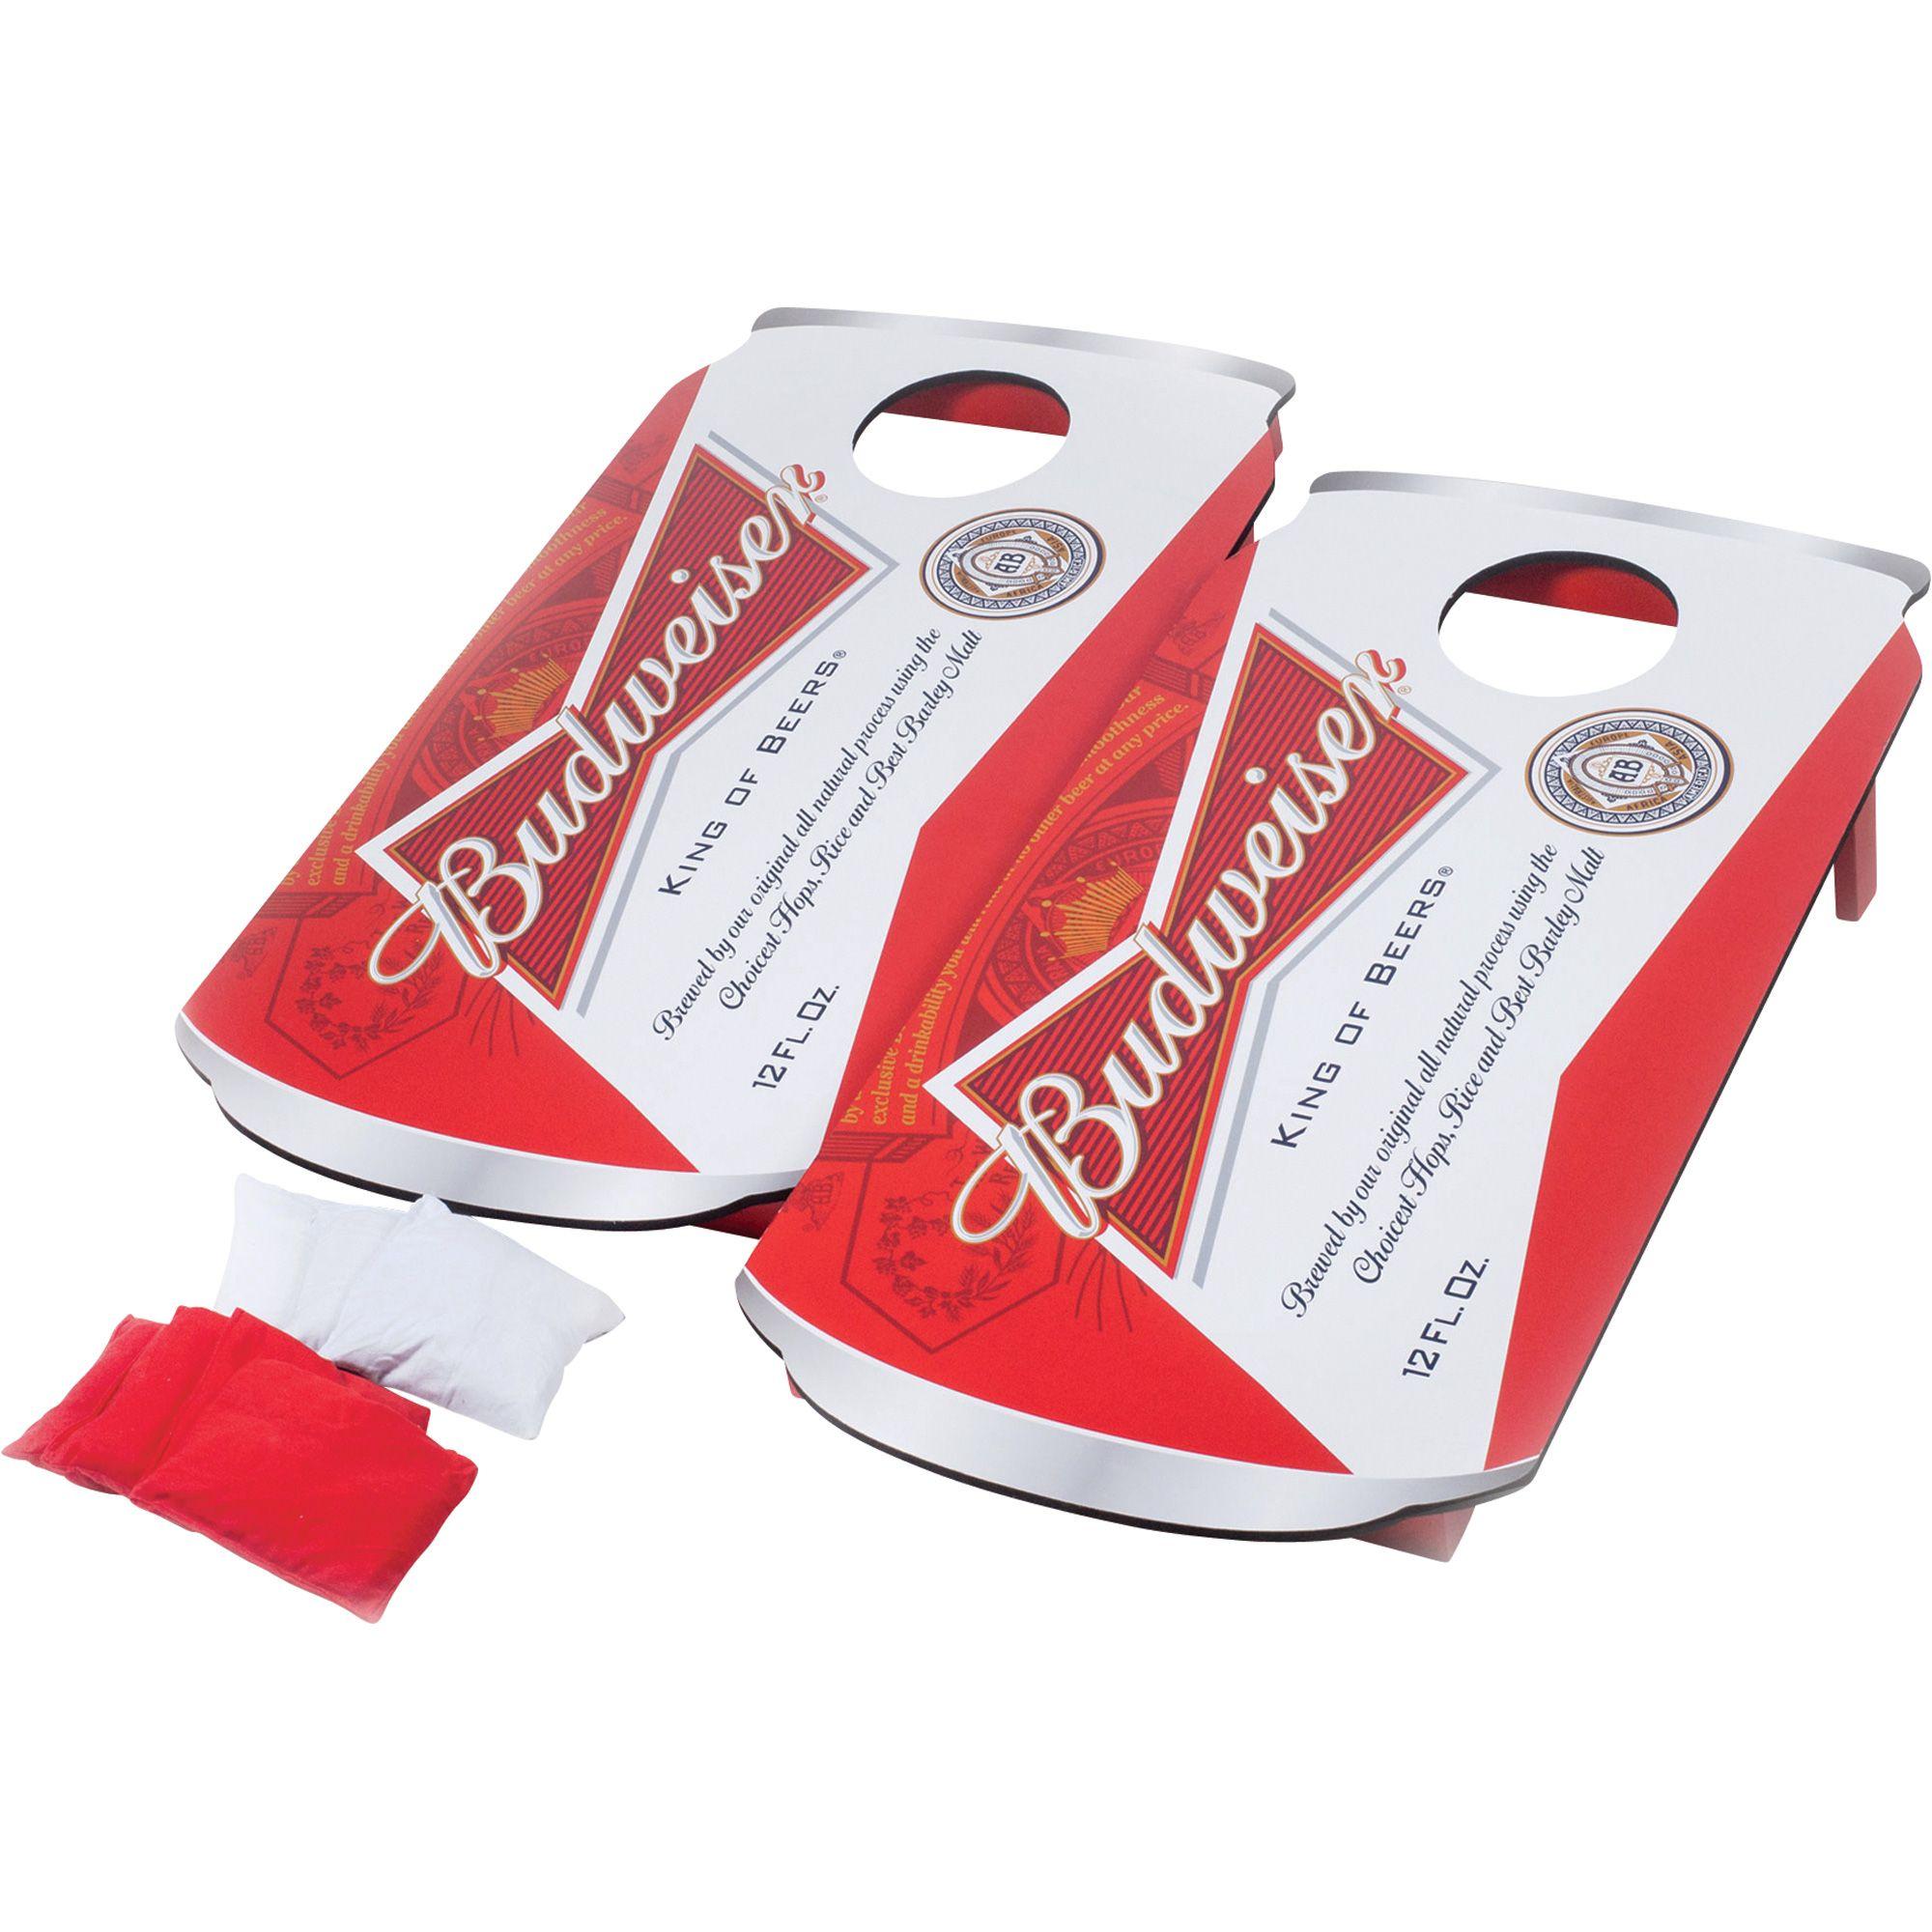 Bud Bowtie Logo - Budweiser Bowtie Logo Corn Hole Game — Includes Boards and Bags ...